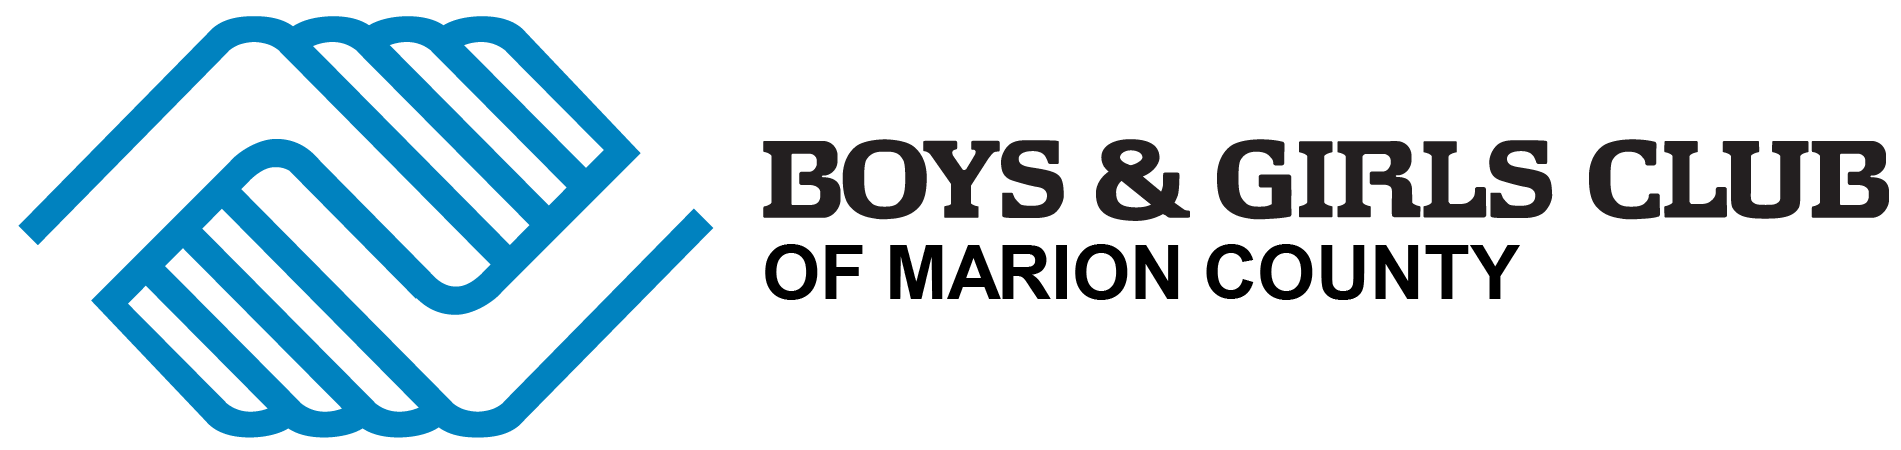 Boys and Girls Club Logo - Meet Our Staff & Girls Club of Marion County